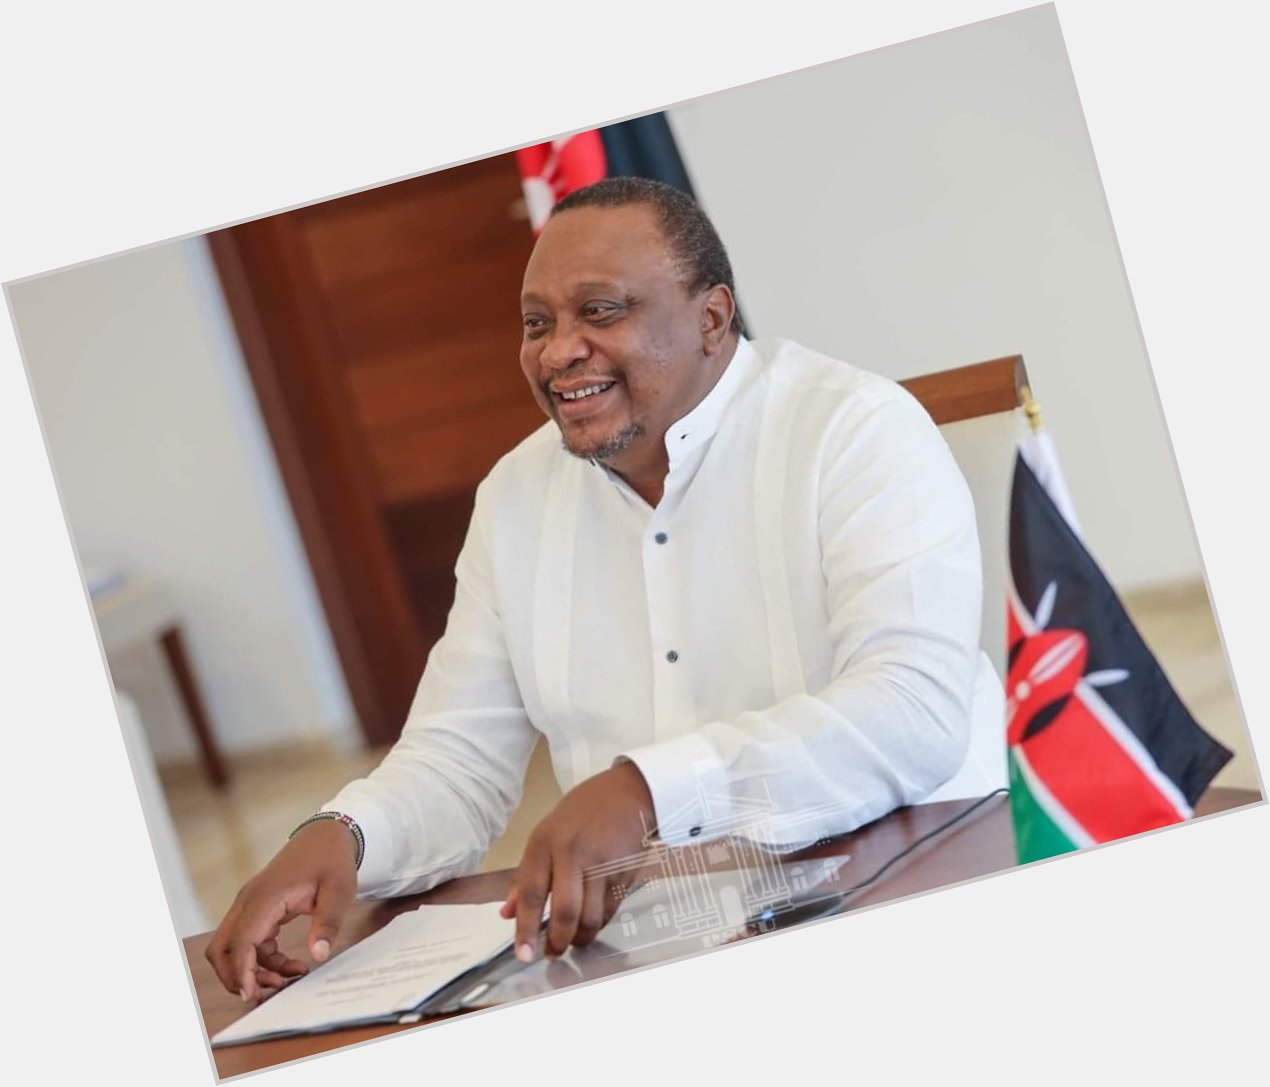 Help me wishing  H.E  Uhuru kenyatta.a HAPPY BIRTHDAY,and pray  for him to blow more candles 